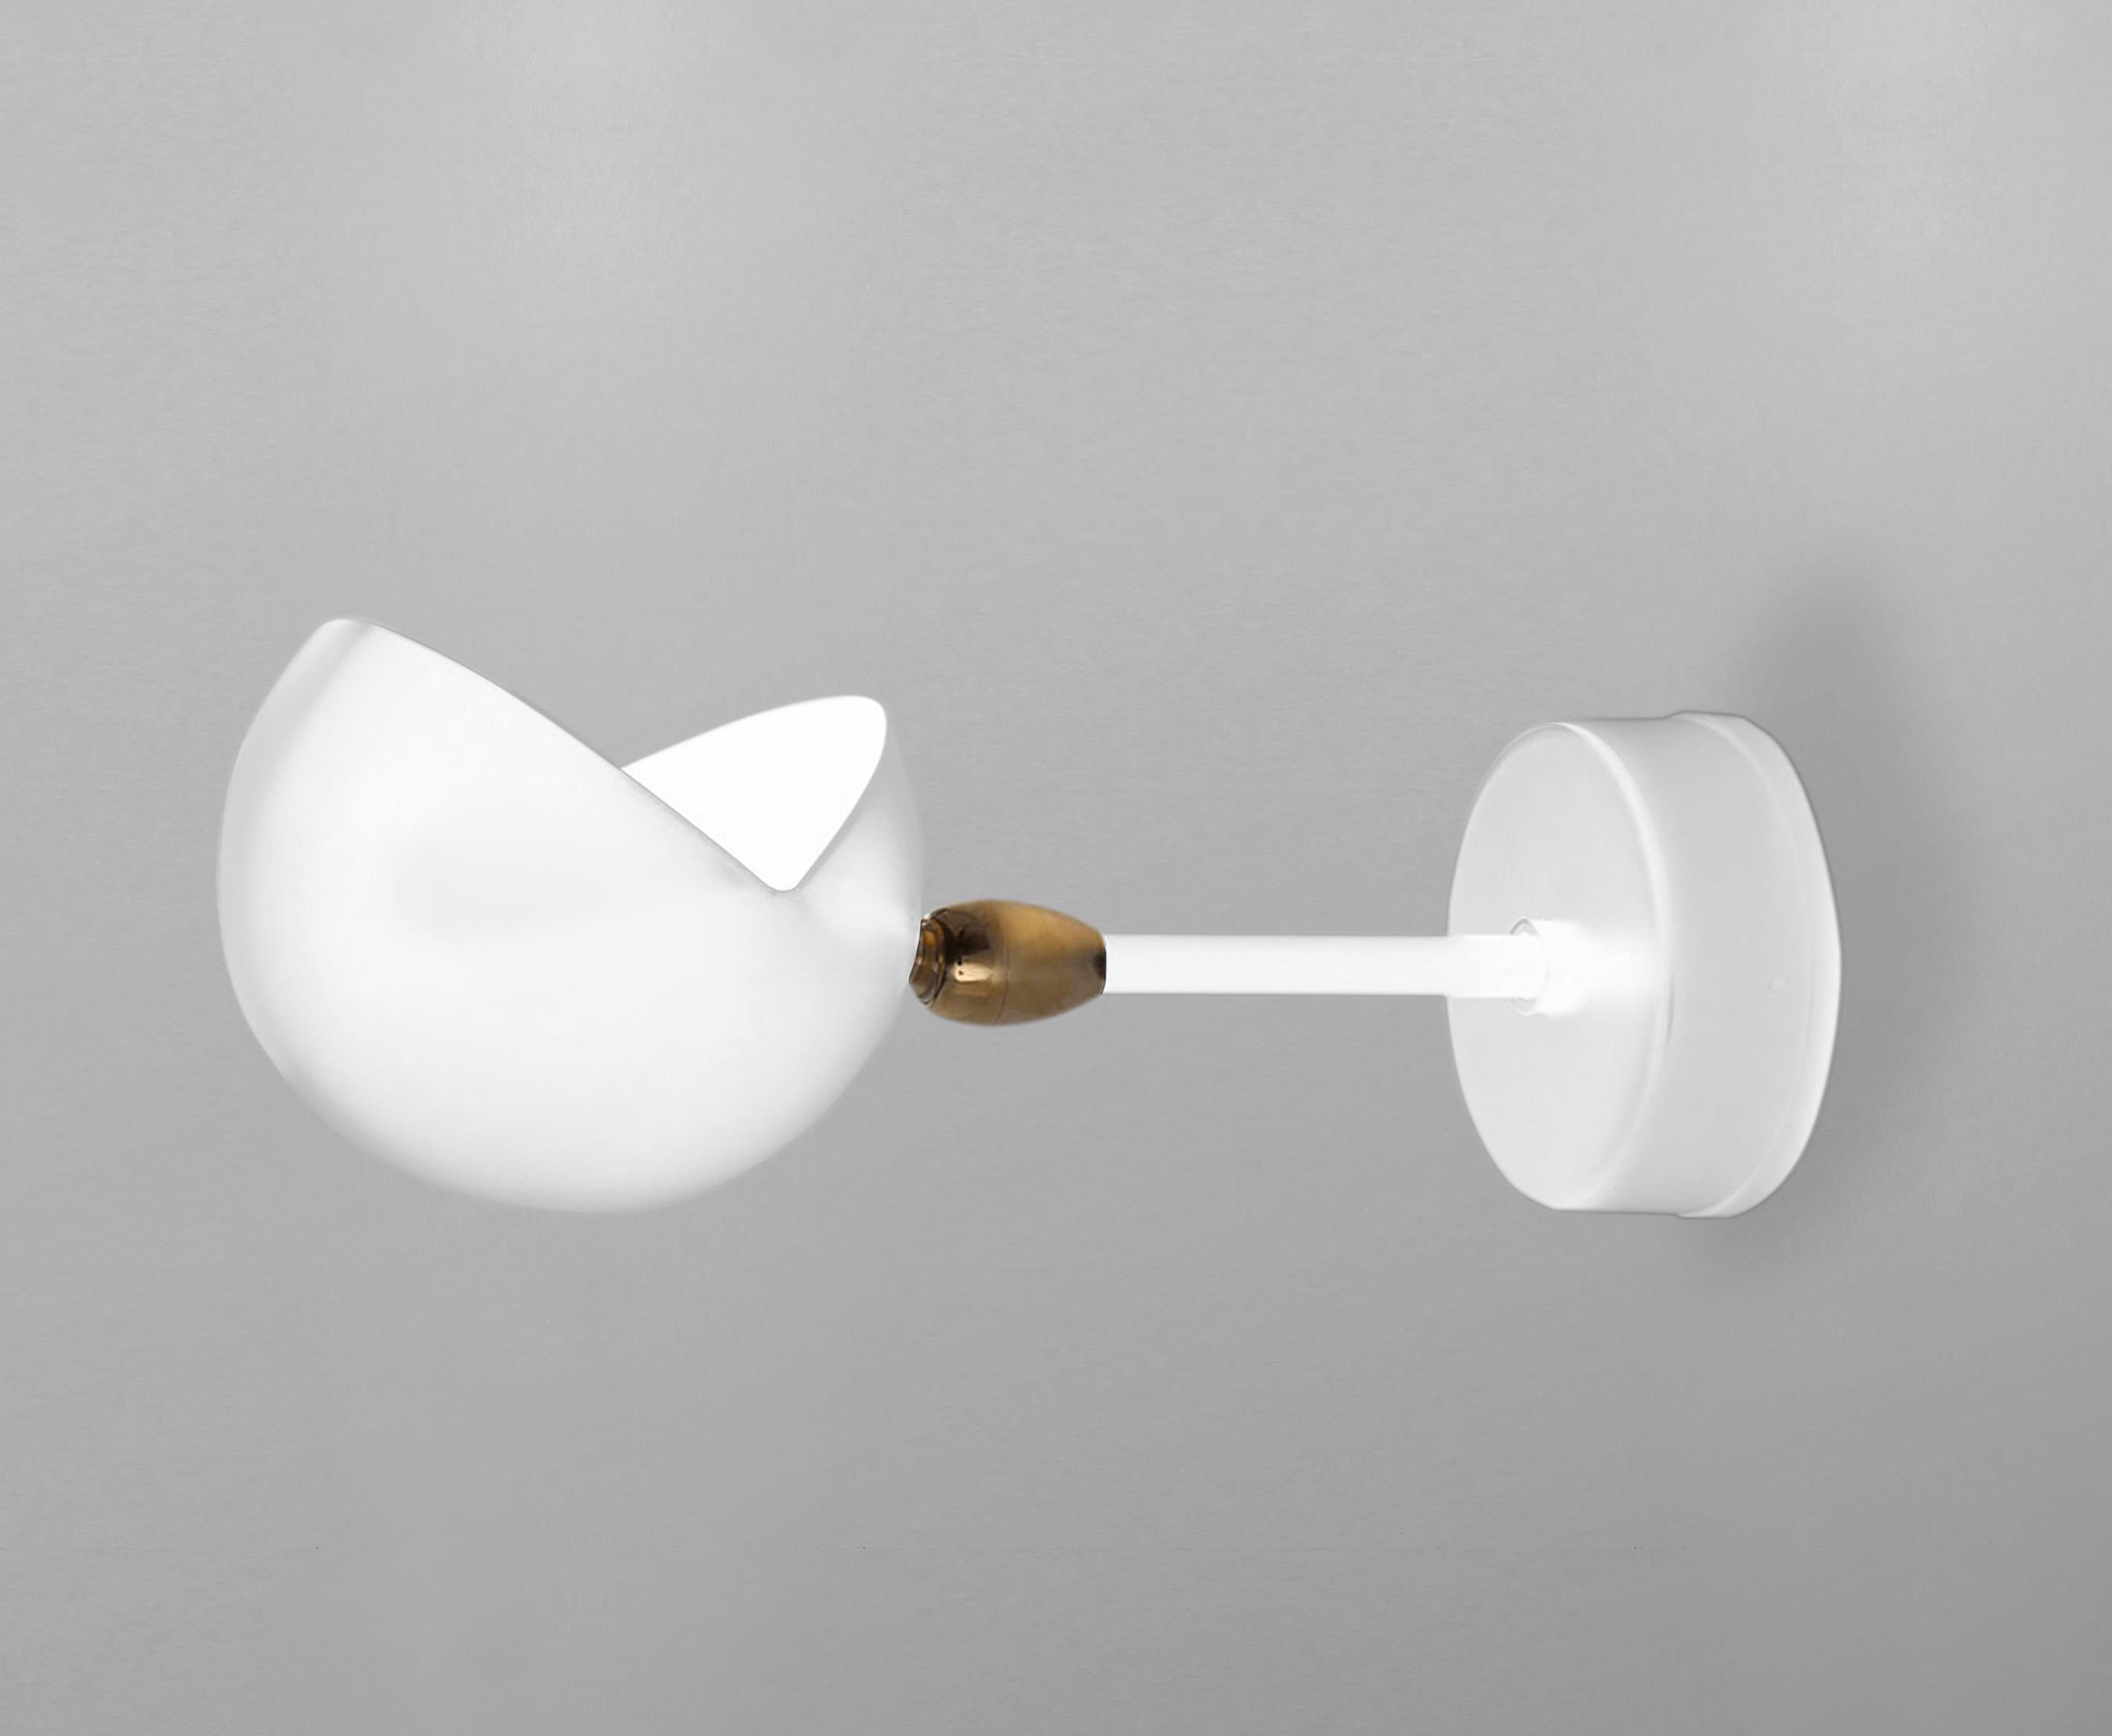 French Serge Mouille Mid-Century Modern White Eye Sconce Wall Lamp For Sale